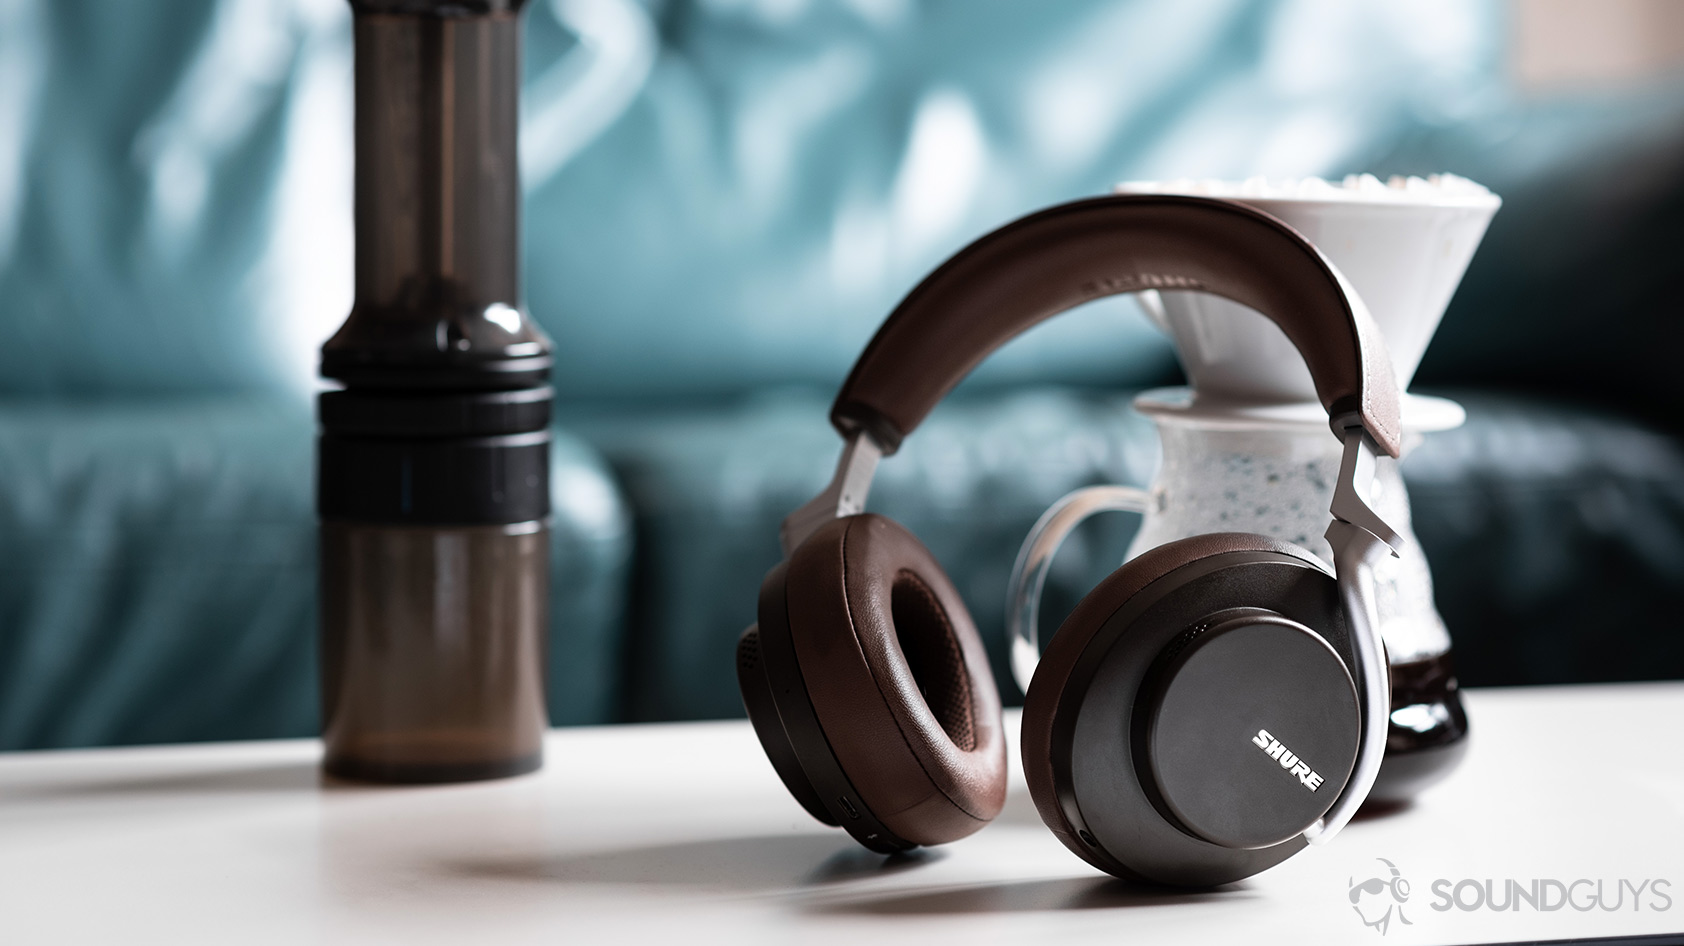 The Shure Aonic 50 noise cancelling headphones lifestyle